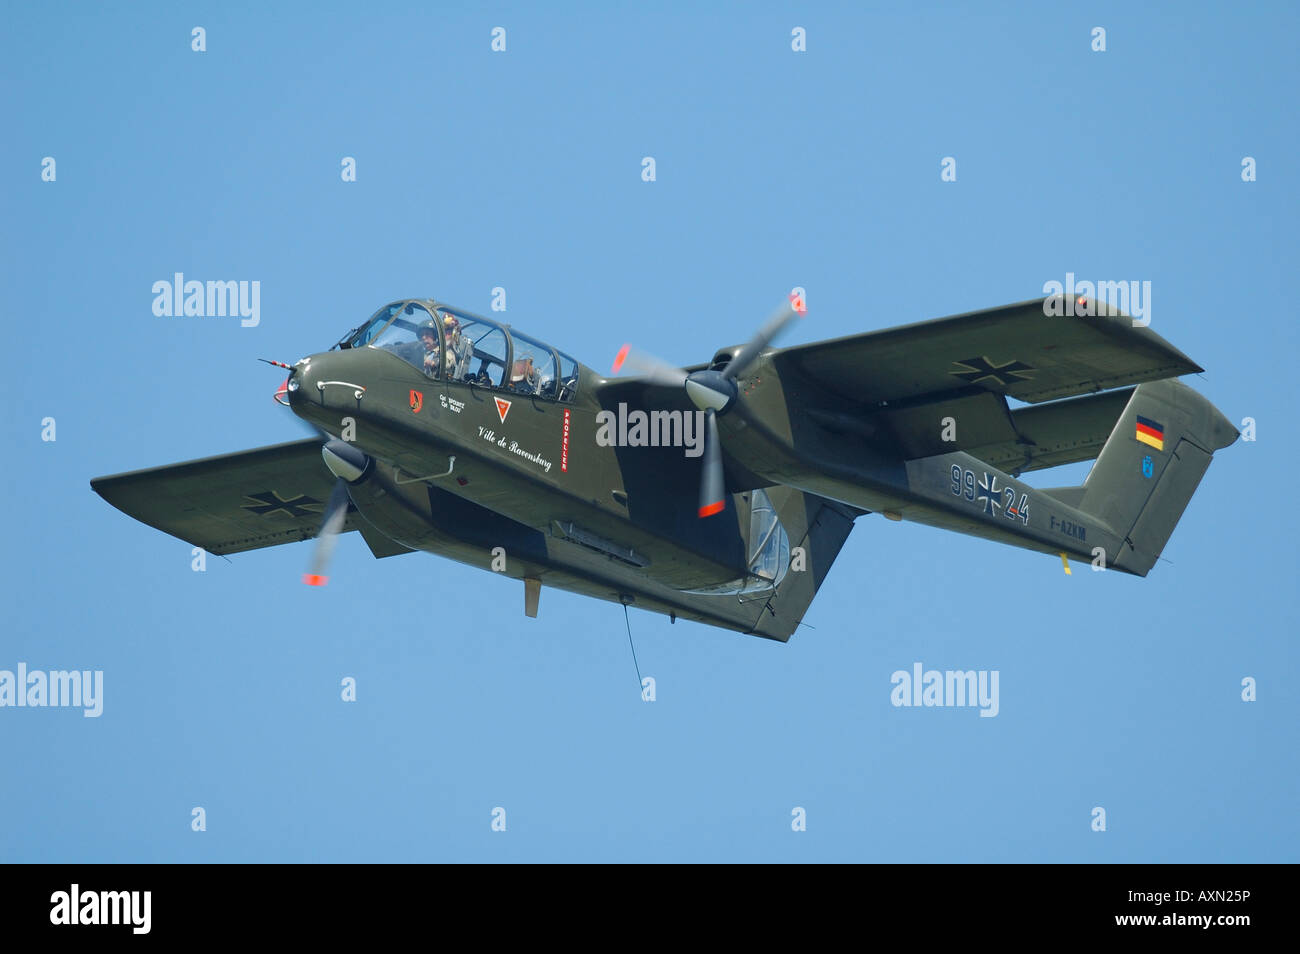 North American Aviation Rockwell OV-10 Bronco of German Luftwaffe air force, french vintage air show, La Ferte Alais, France Stock Photo